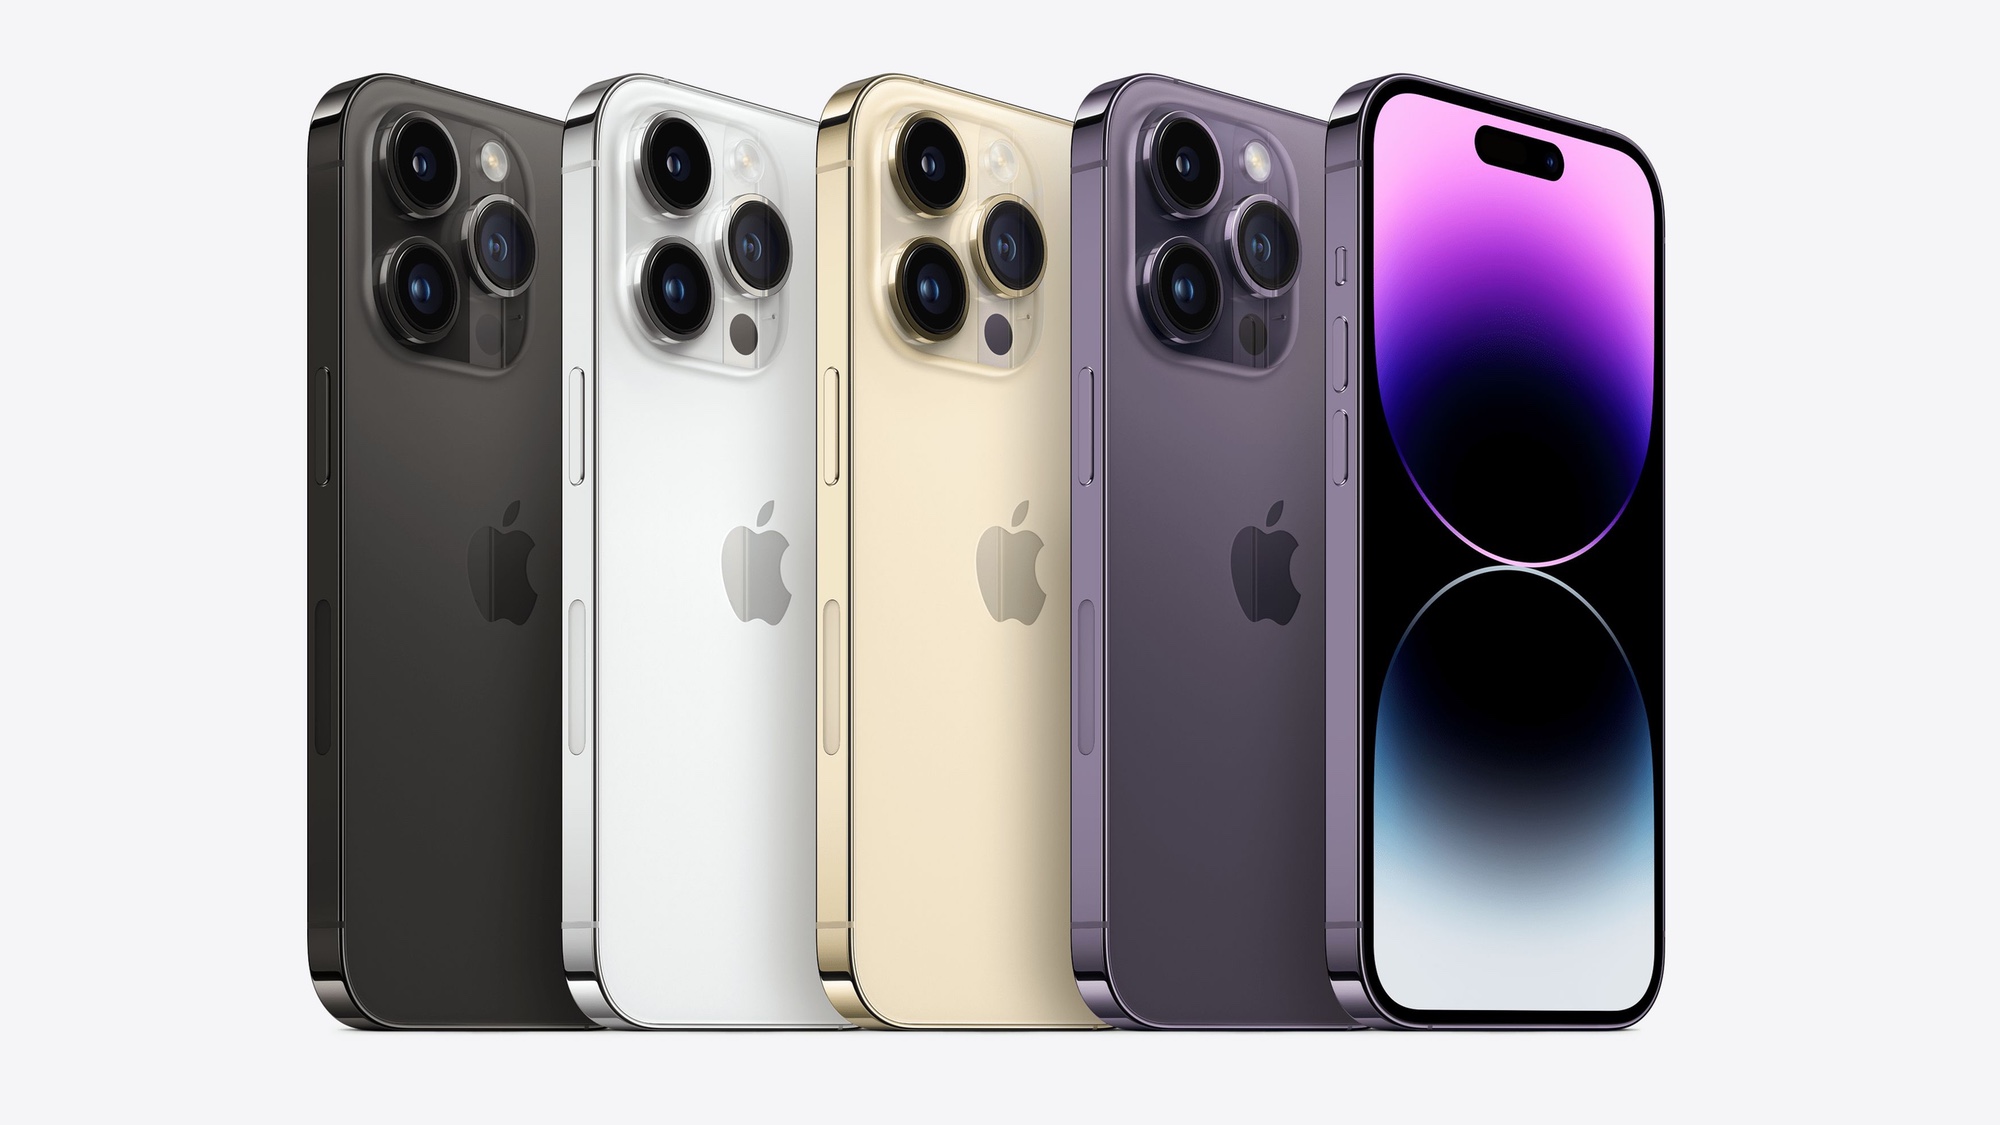 Which color is most popular in iPhone 14 Pro?